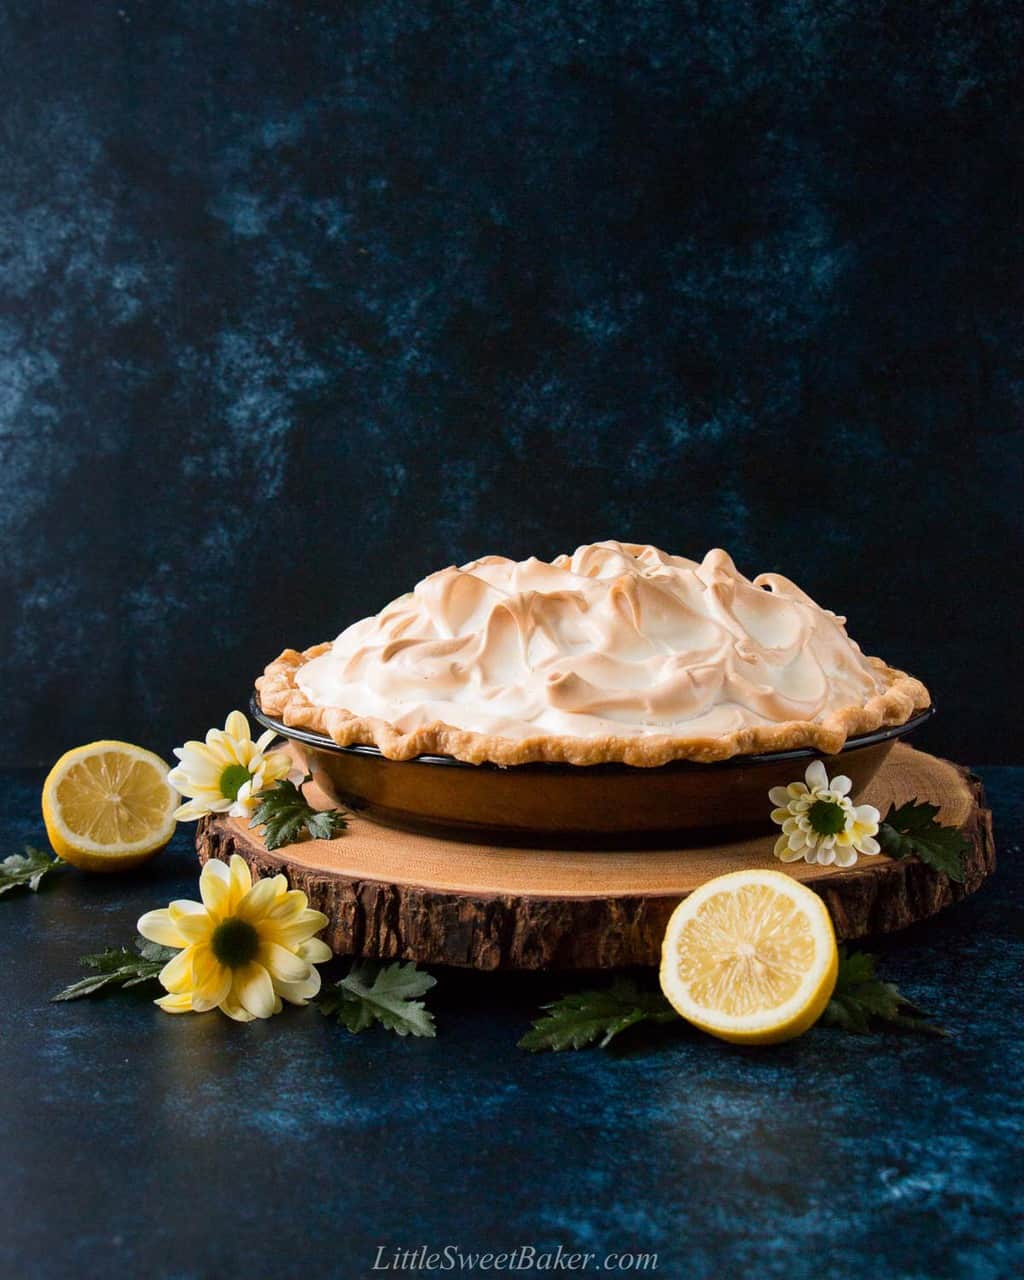 A lemon meringue pie on a wooden board surrounded by flowers and lemons.